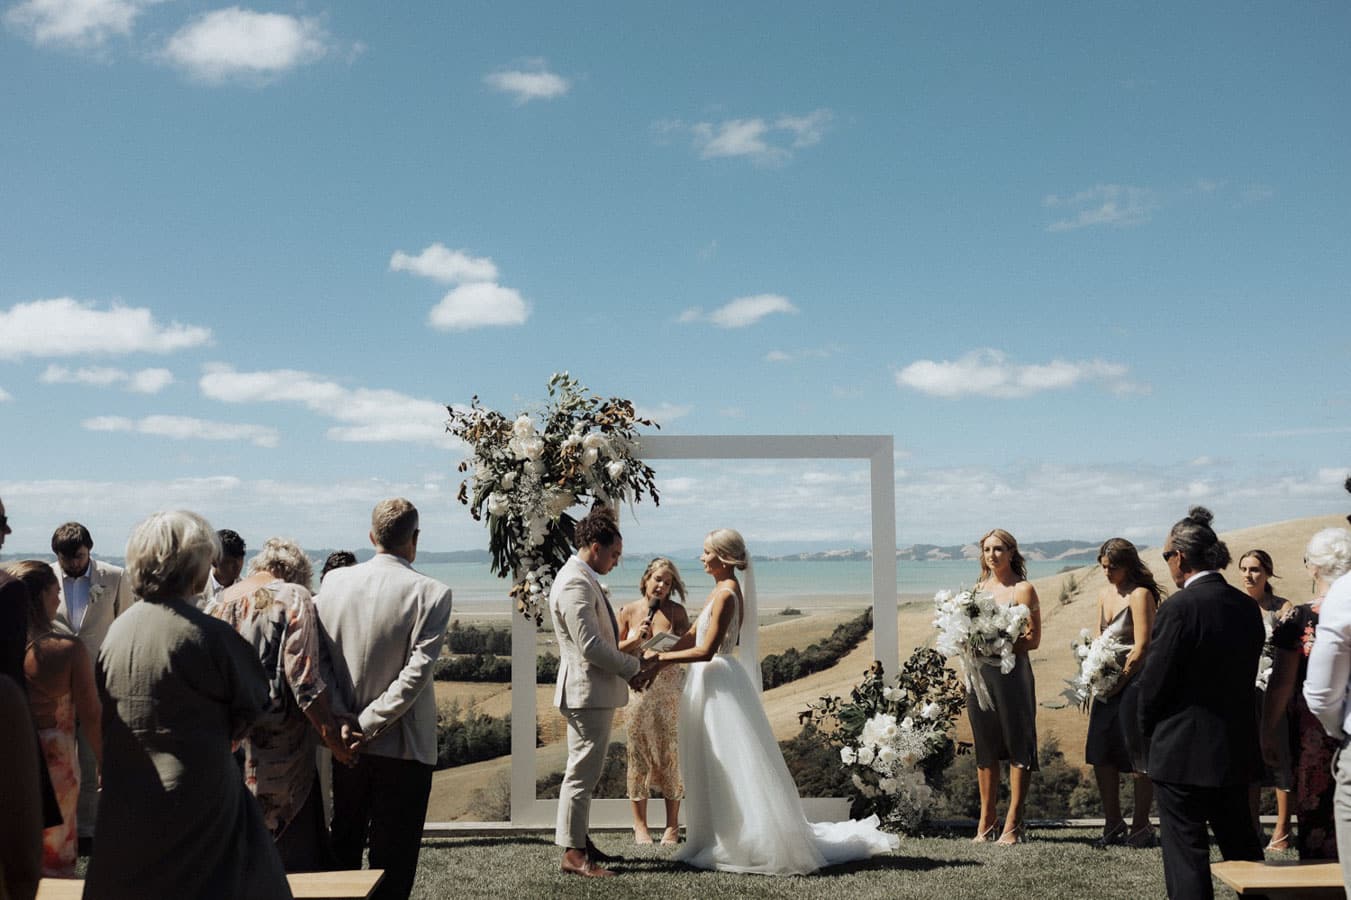 Ceremony in summer, also featured in Together Journal